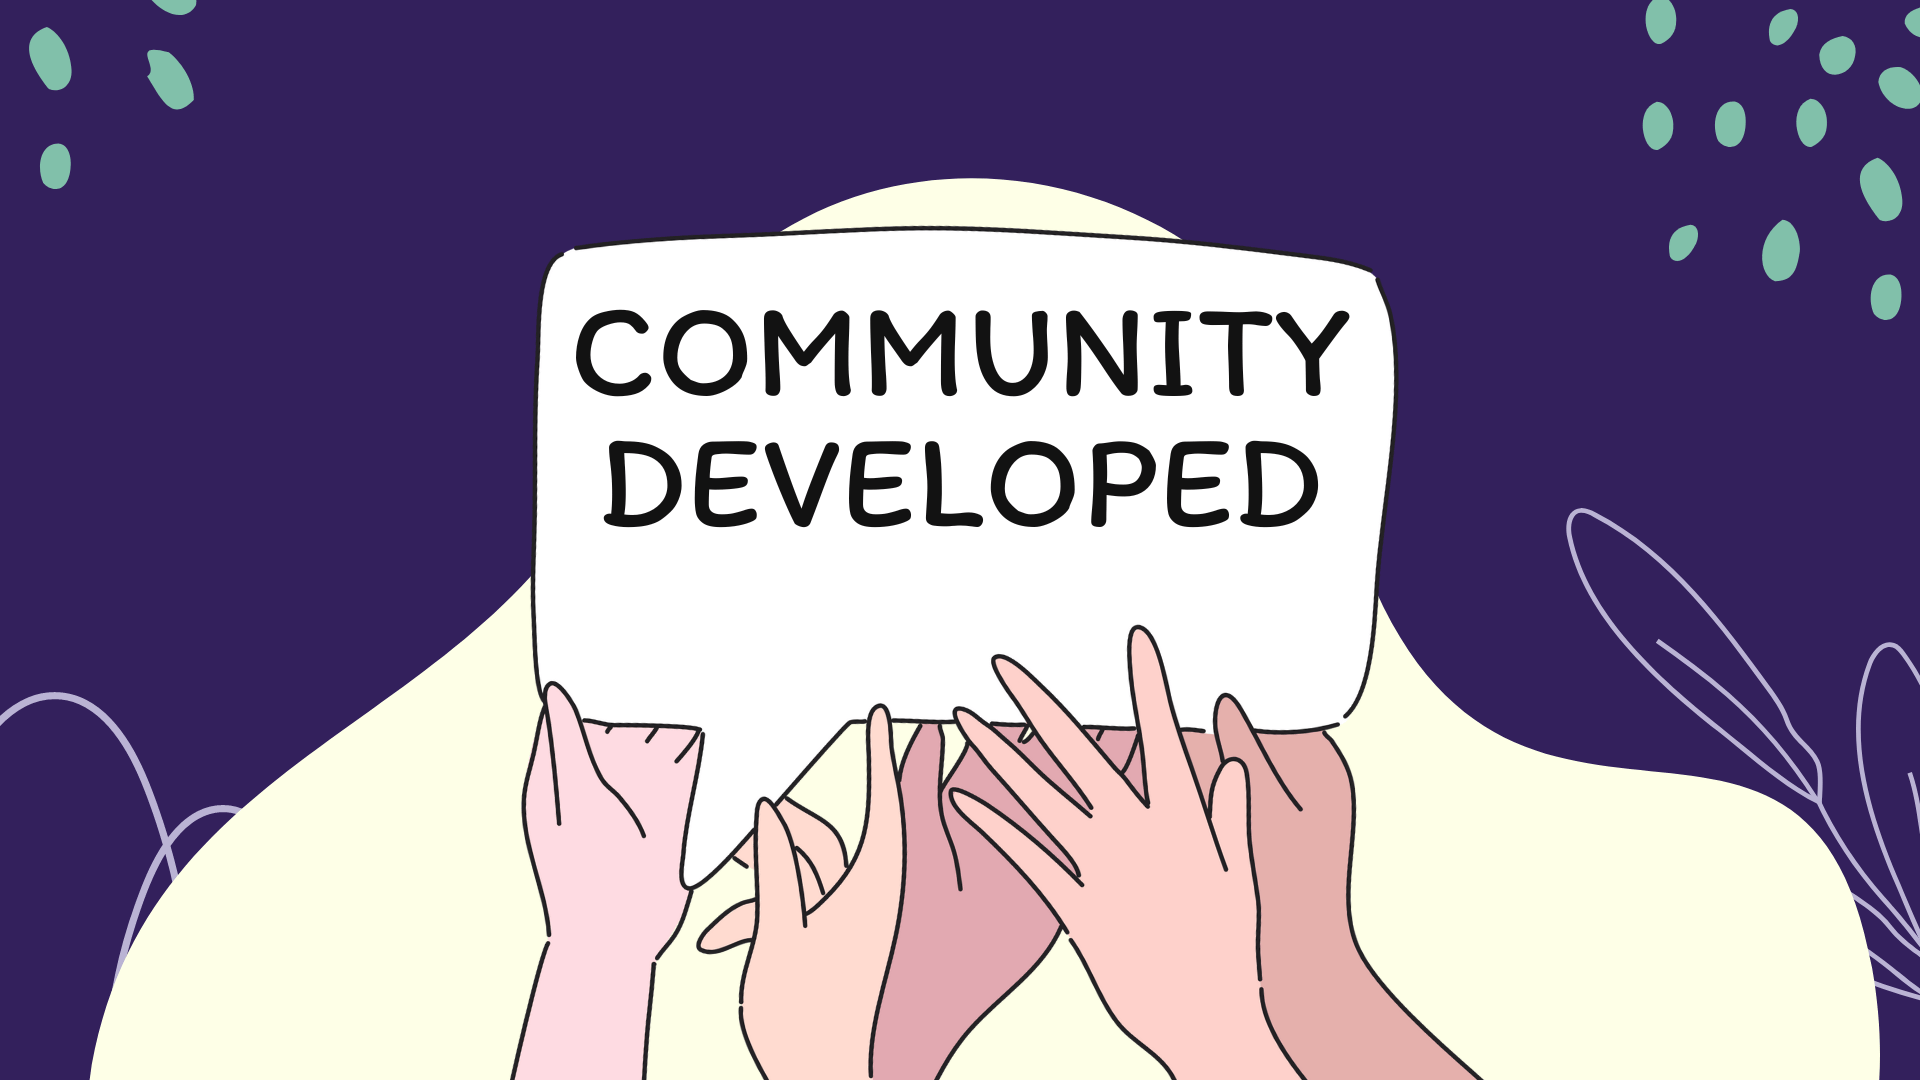 An image showing a bunch of hands holding up a sign that says Community Developed. the background is dark purple with a few green decorative items.